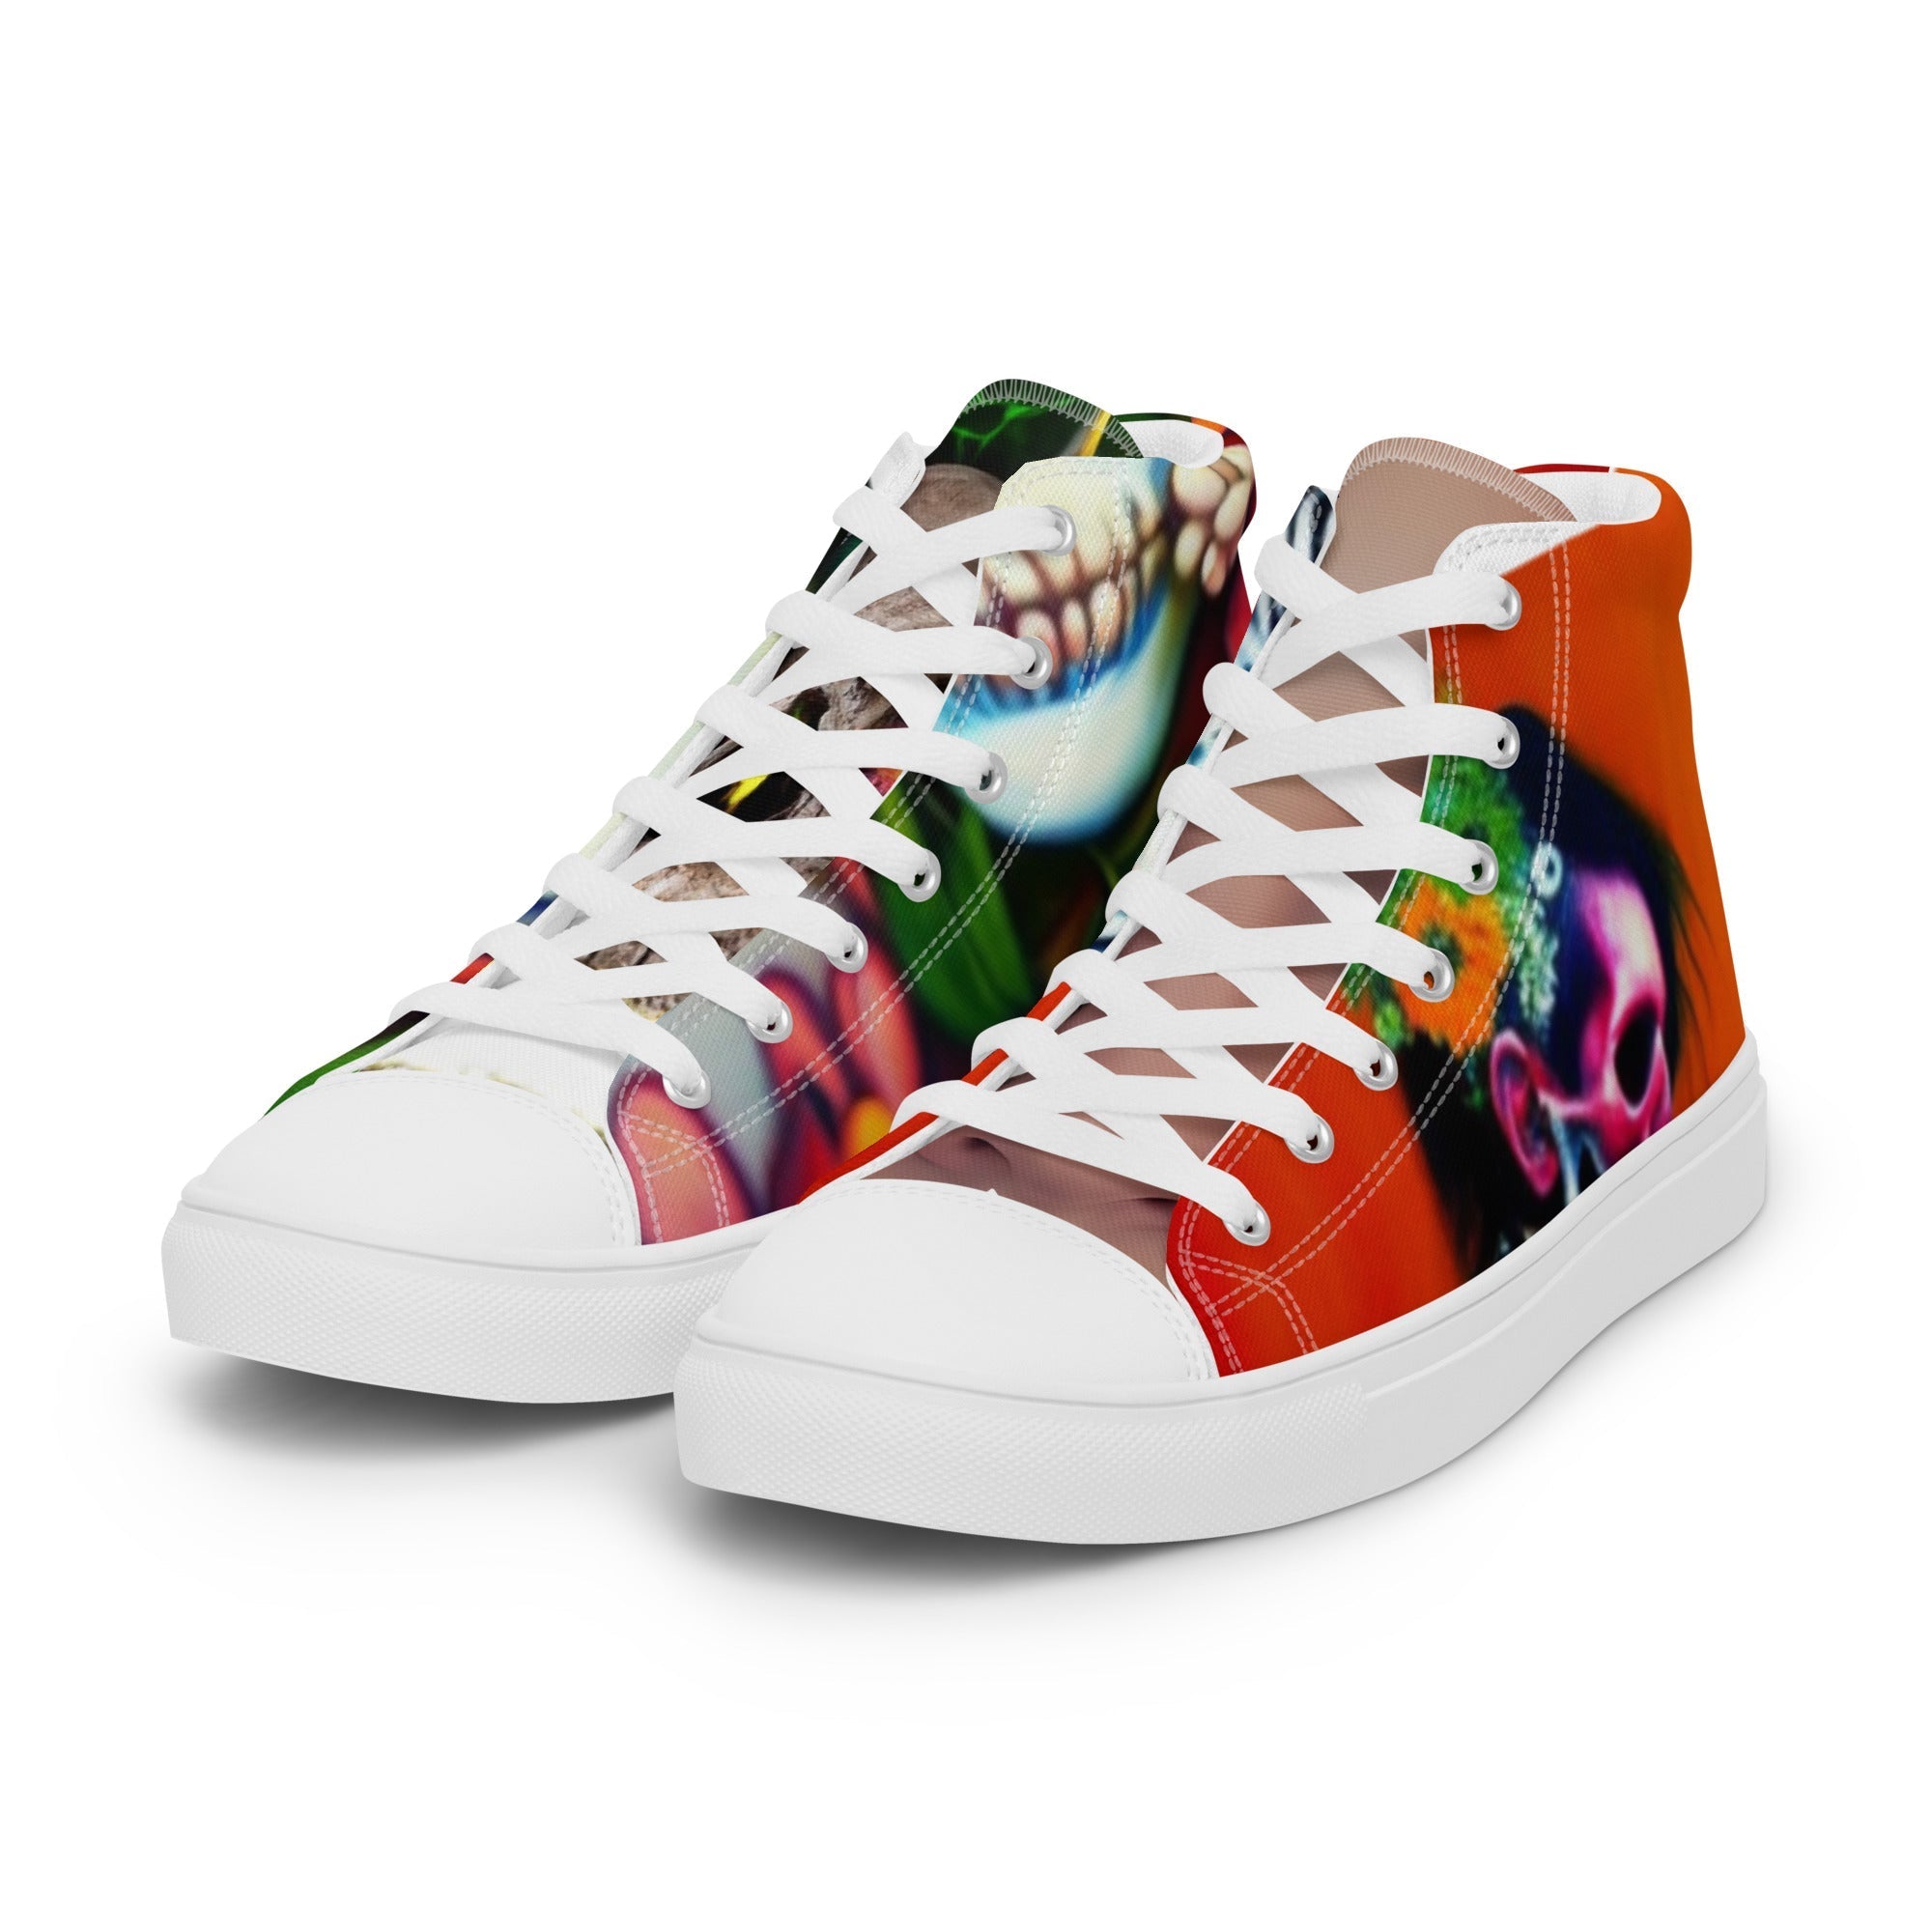 Enchanted Forest Women's High Top Canvas Shoes - Dance with Joy and Magic through Enchanting Lands. - Guy Christopher